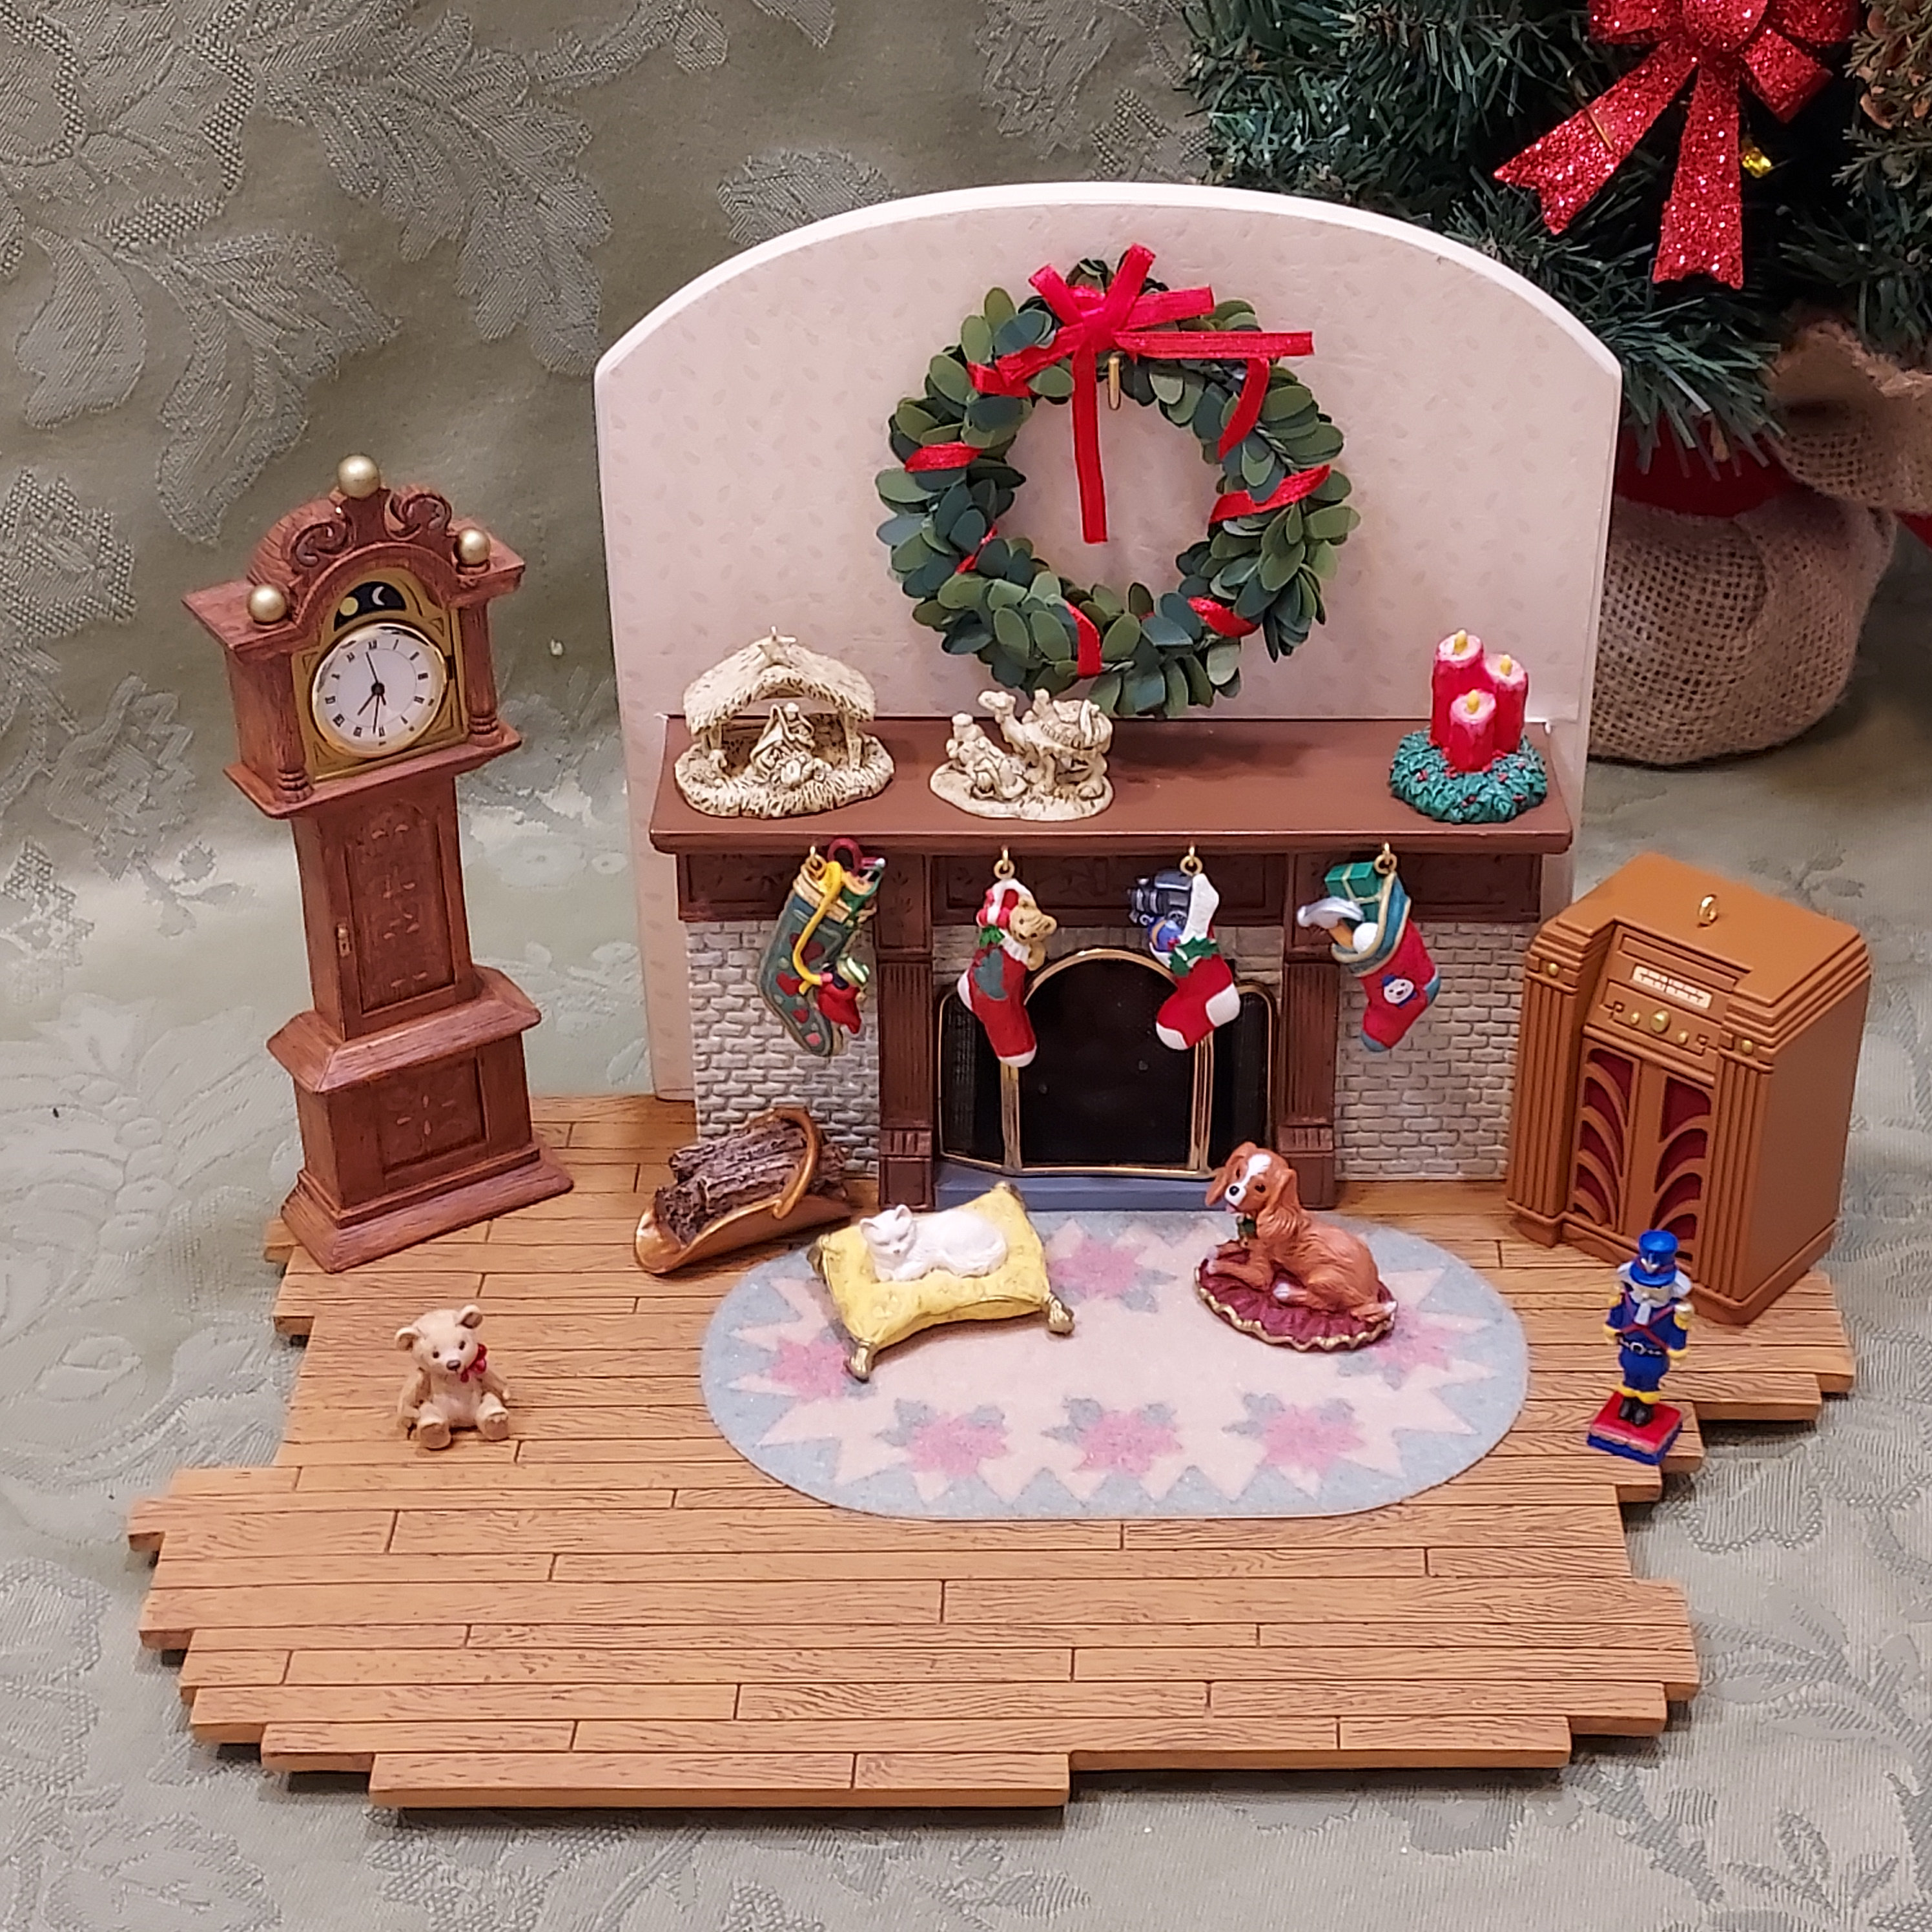 Hallmark Keepsake Ornaments - Our intricately crafted miniature ornaments  and trees bring big merry to kids' rooms, dorm rooms, kitchens, apartments  and more. Not to mention a whole lot of “Aww!” ❤️